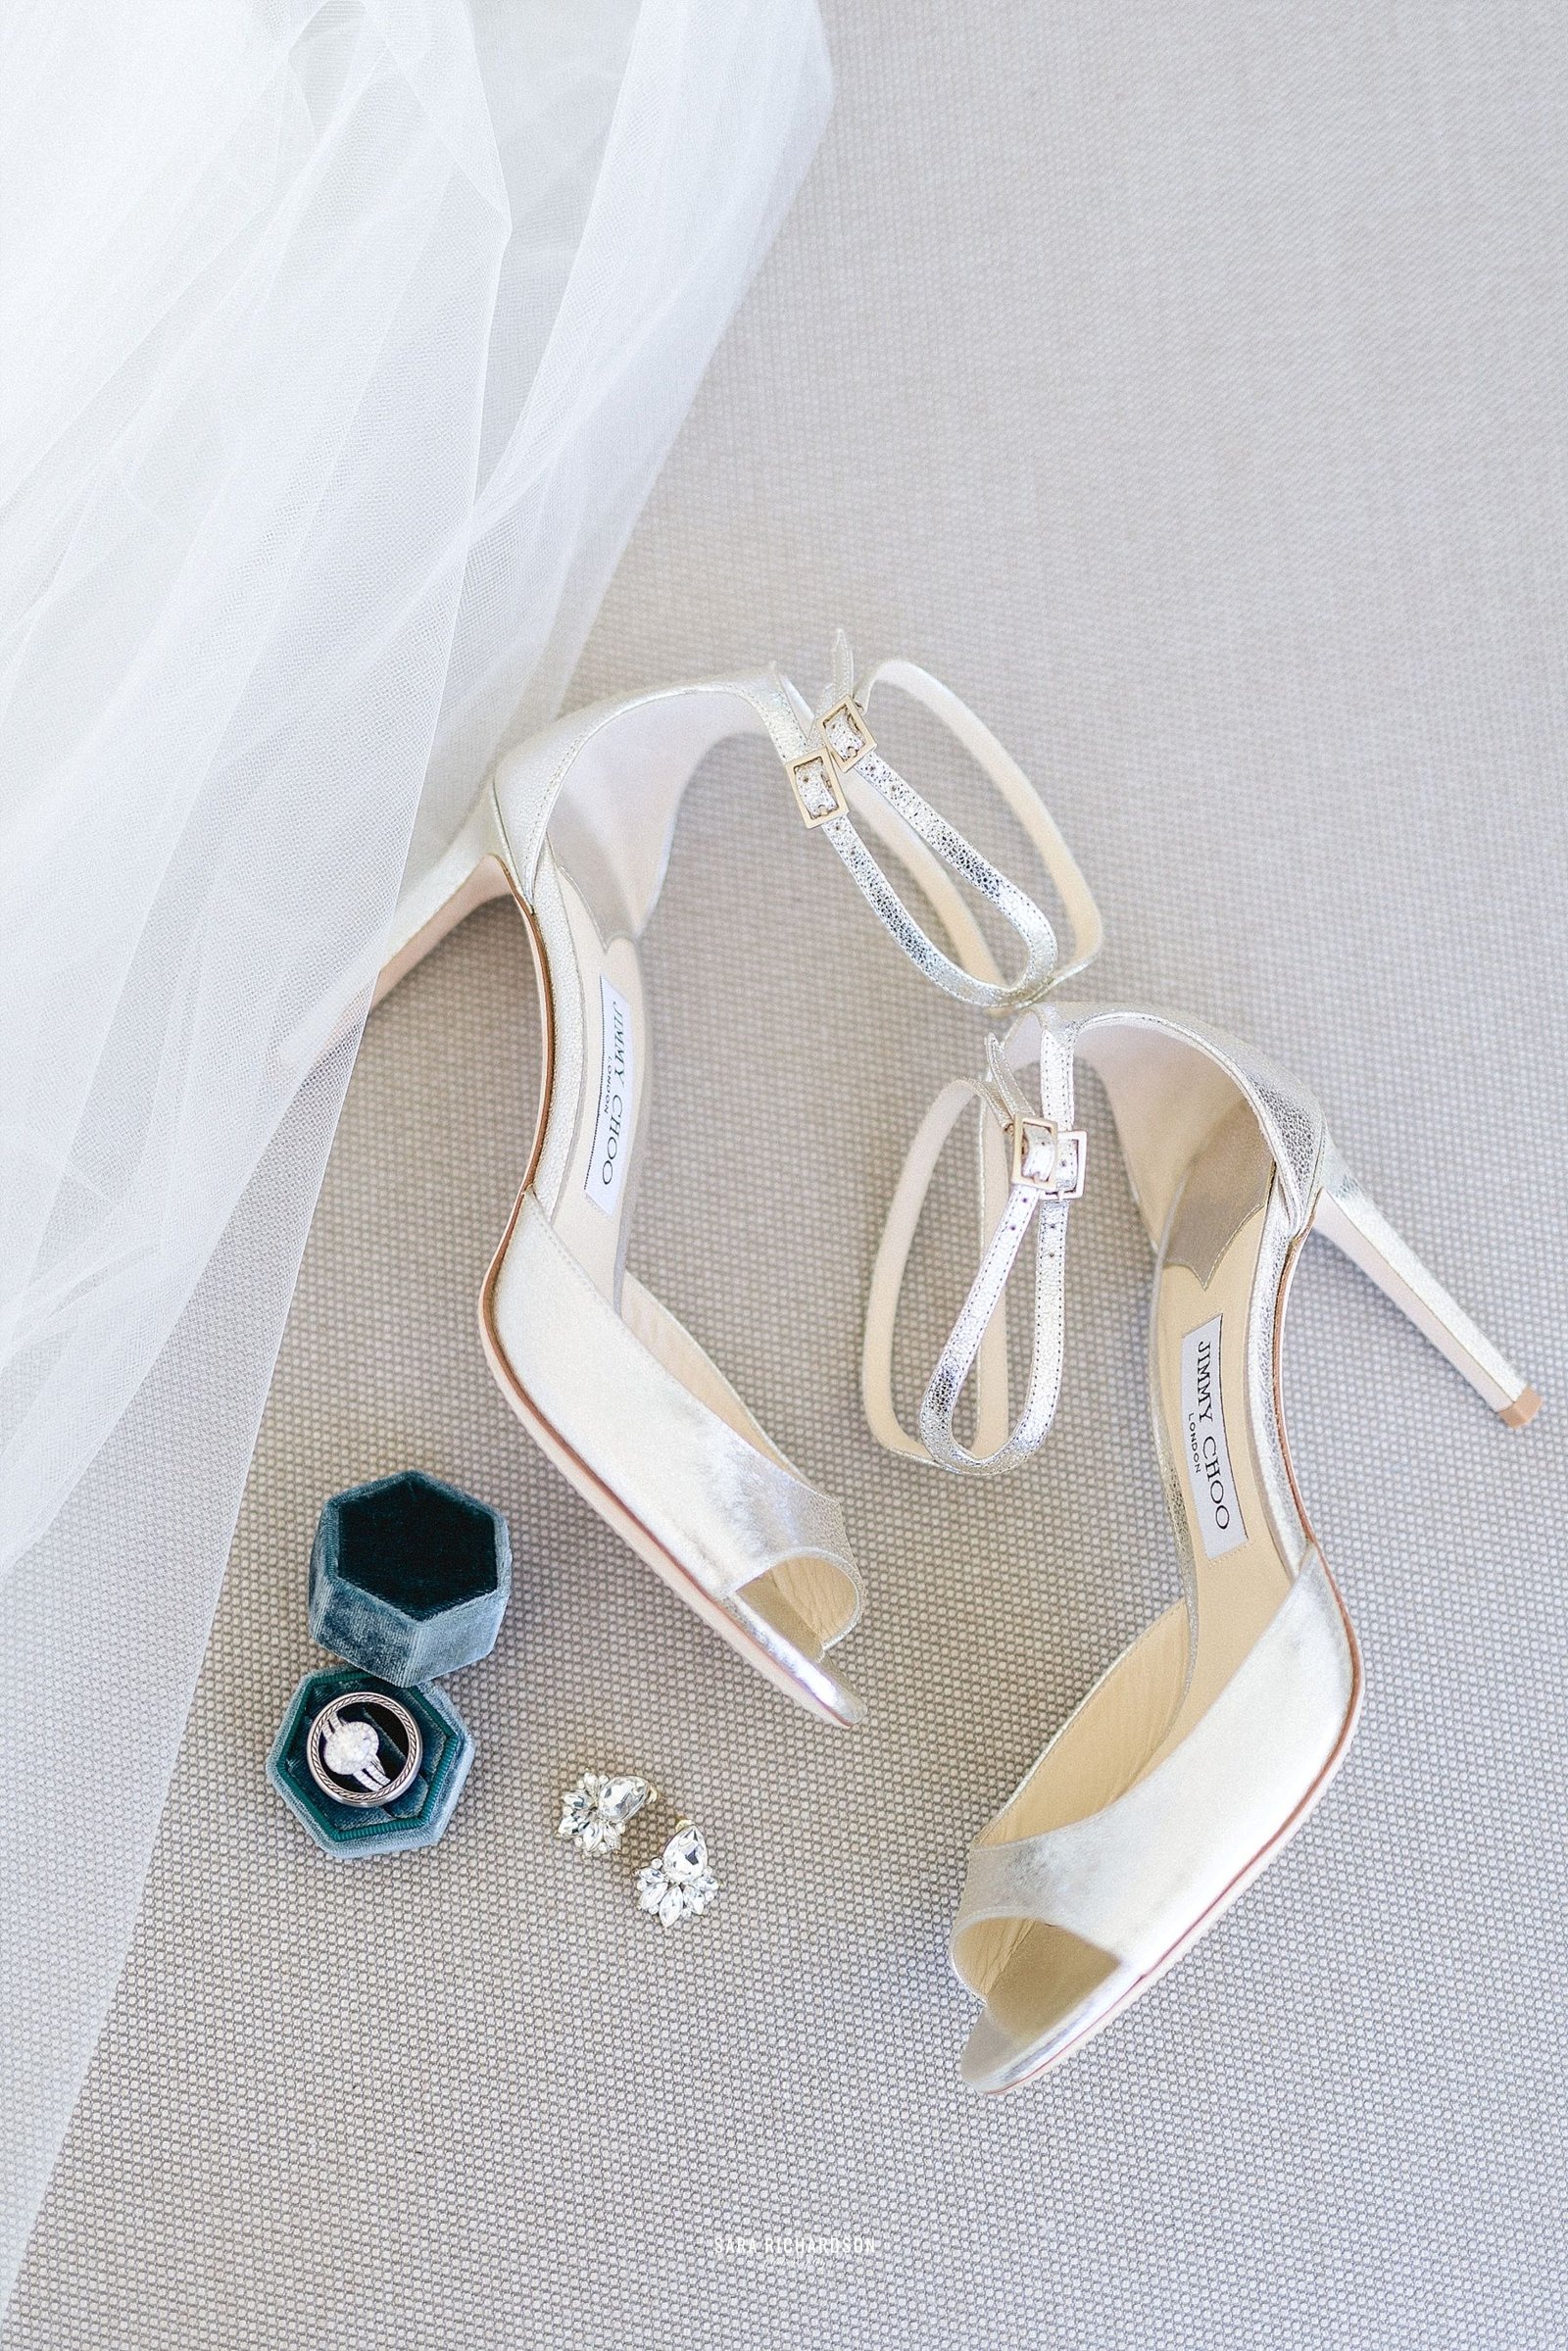 Our Bride Sara, from Scottsdale Arizona, decided to go with Jimmy Choo for her Wedding Shoes. Rocking a Cartier Wedding band, she looked stunning for her groom to be. We were so excited to be part of a such a special Briode's Wedding day!